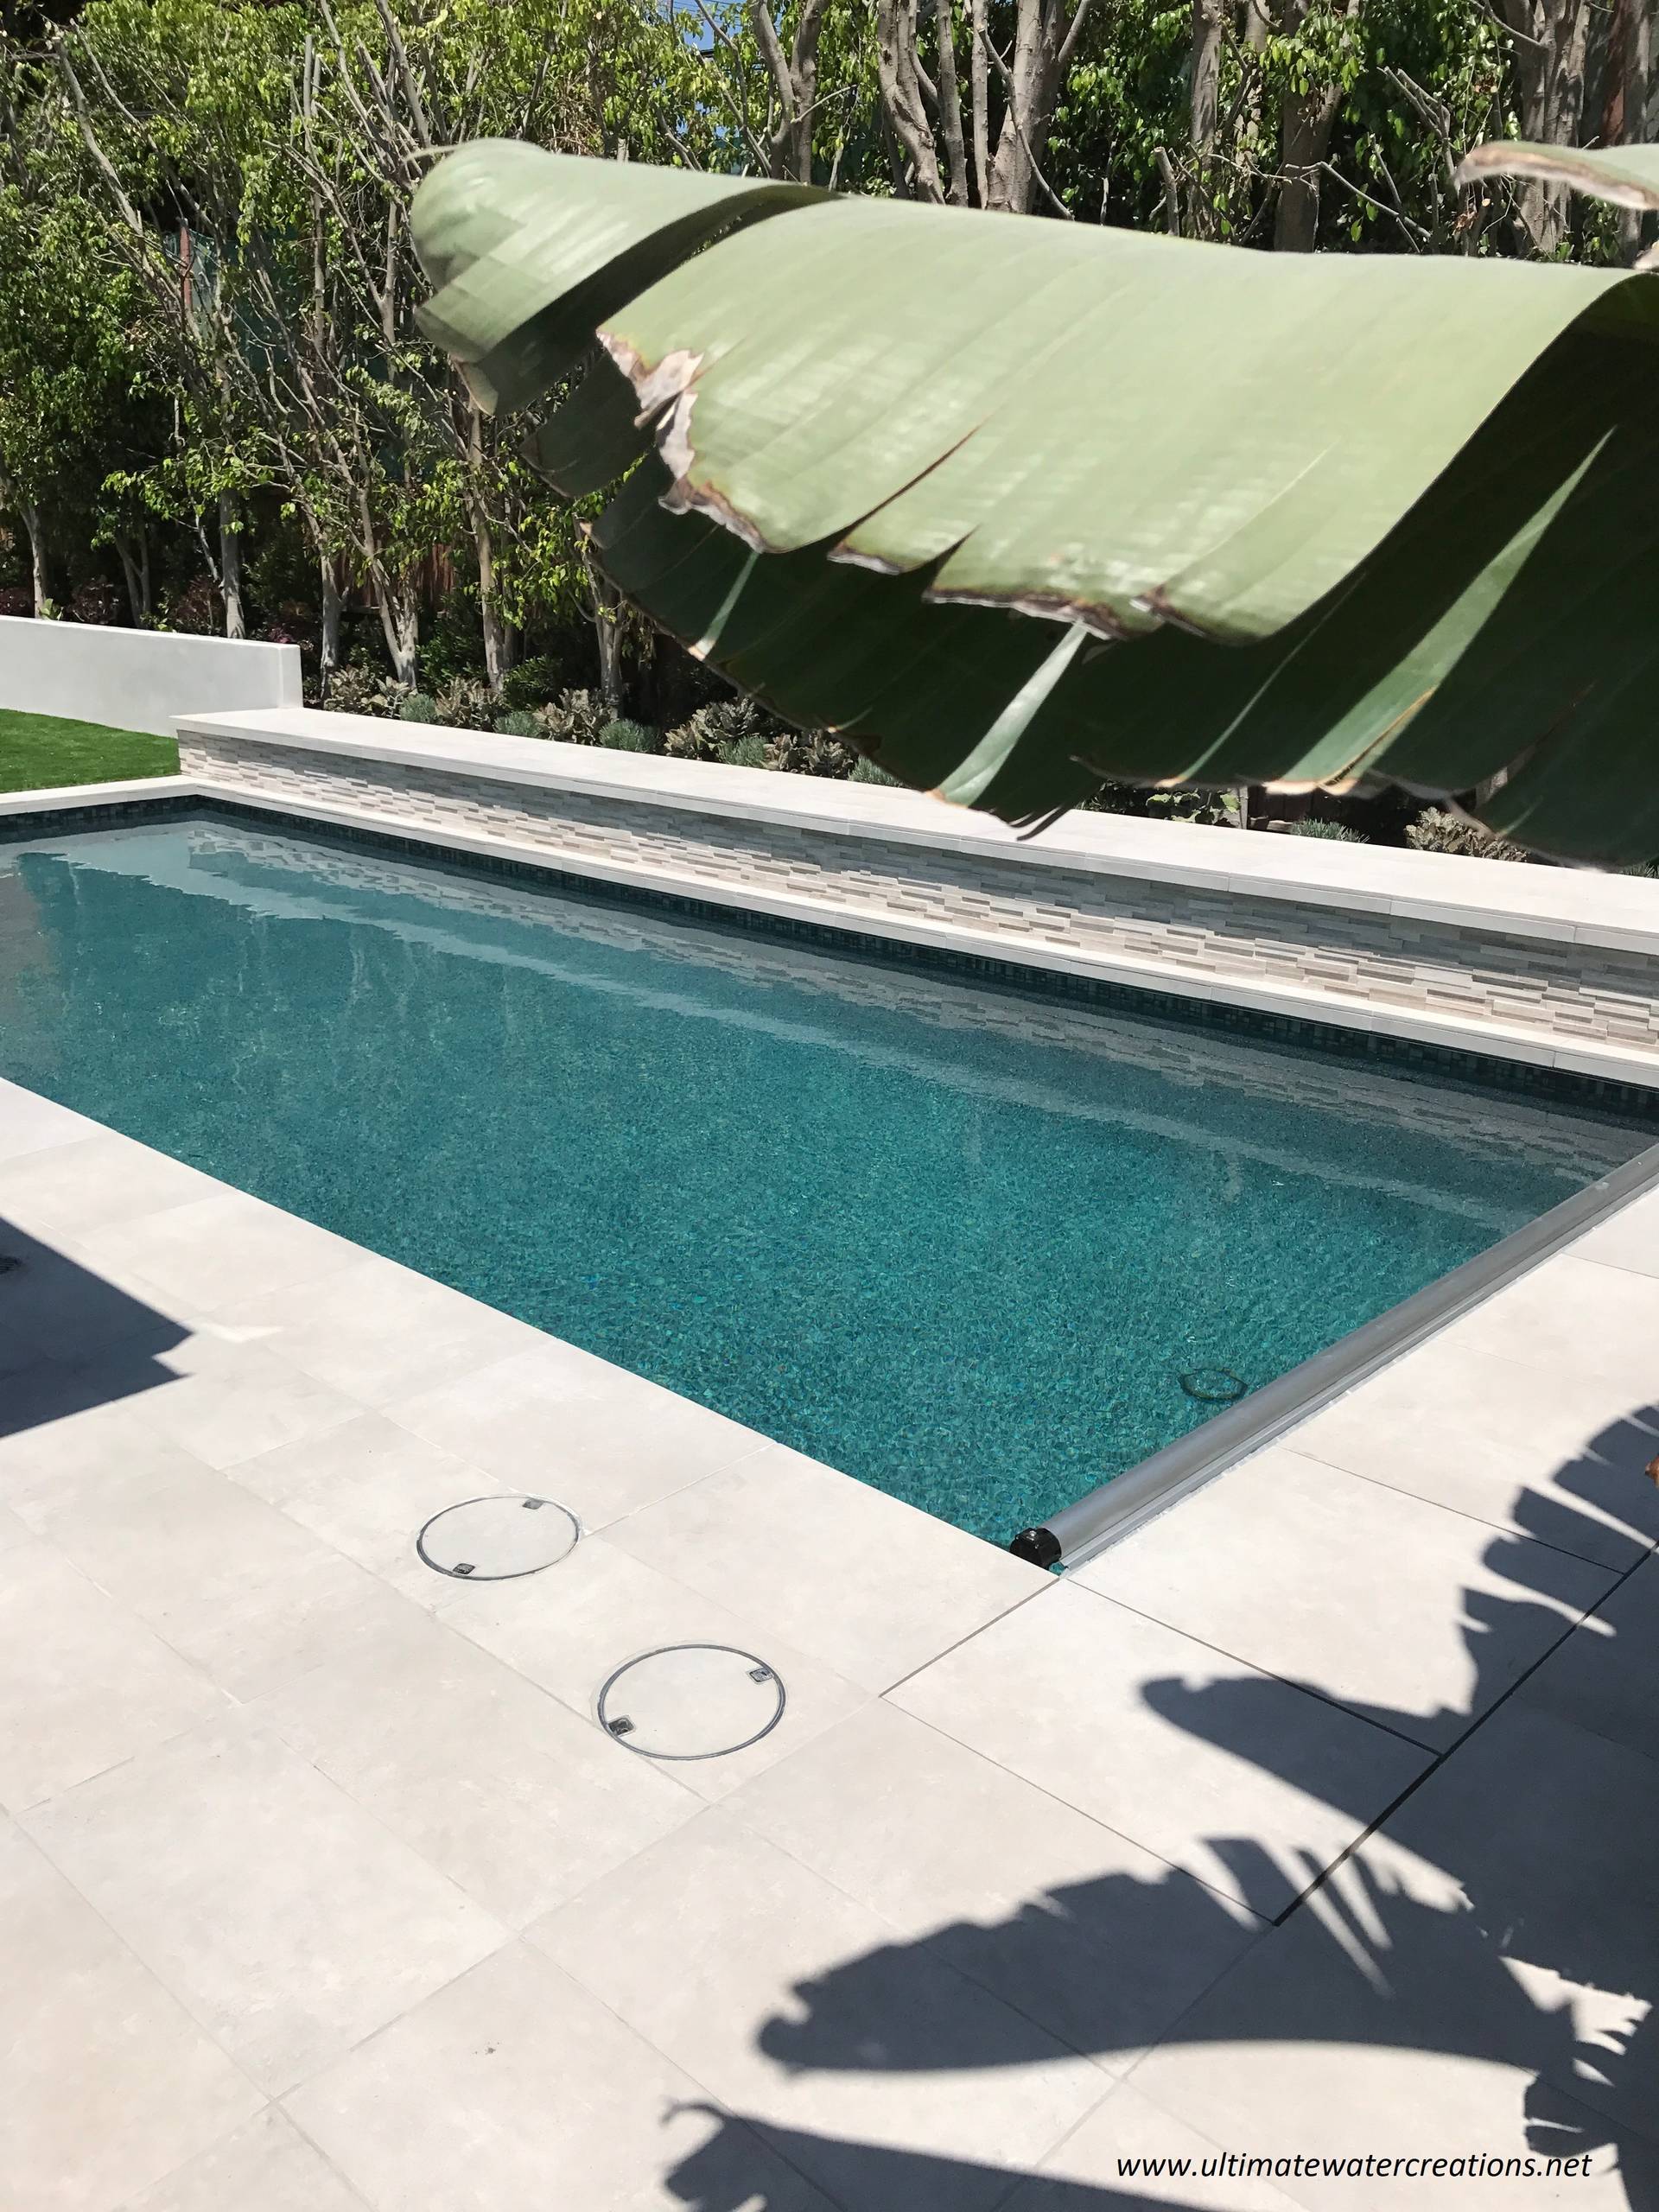 Before & After Pacific Palisades - Contemporary Pool with Built-In Cover